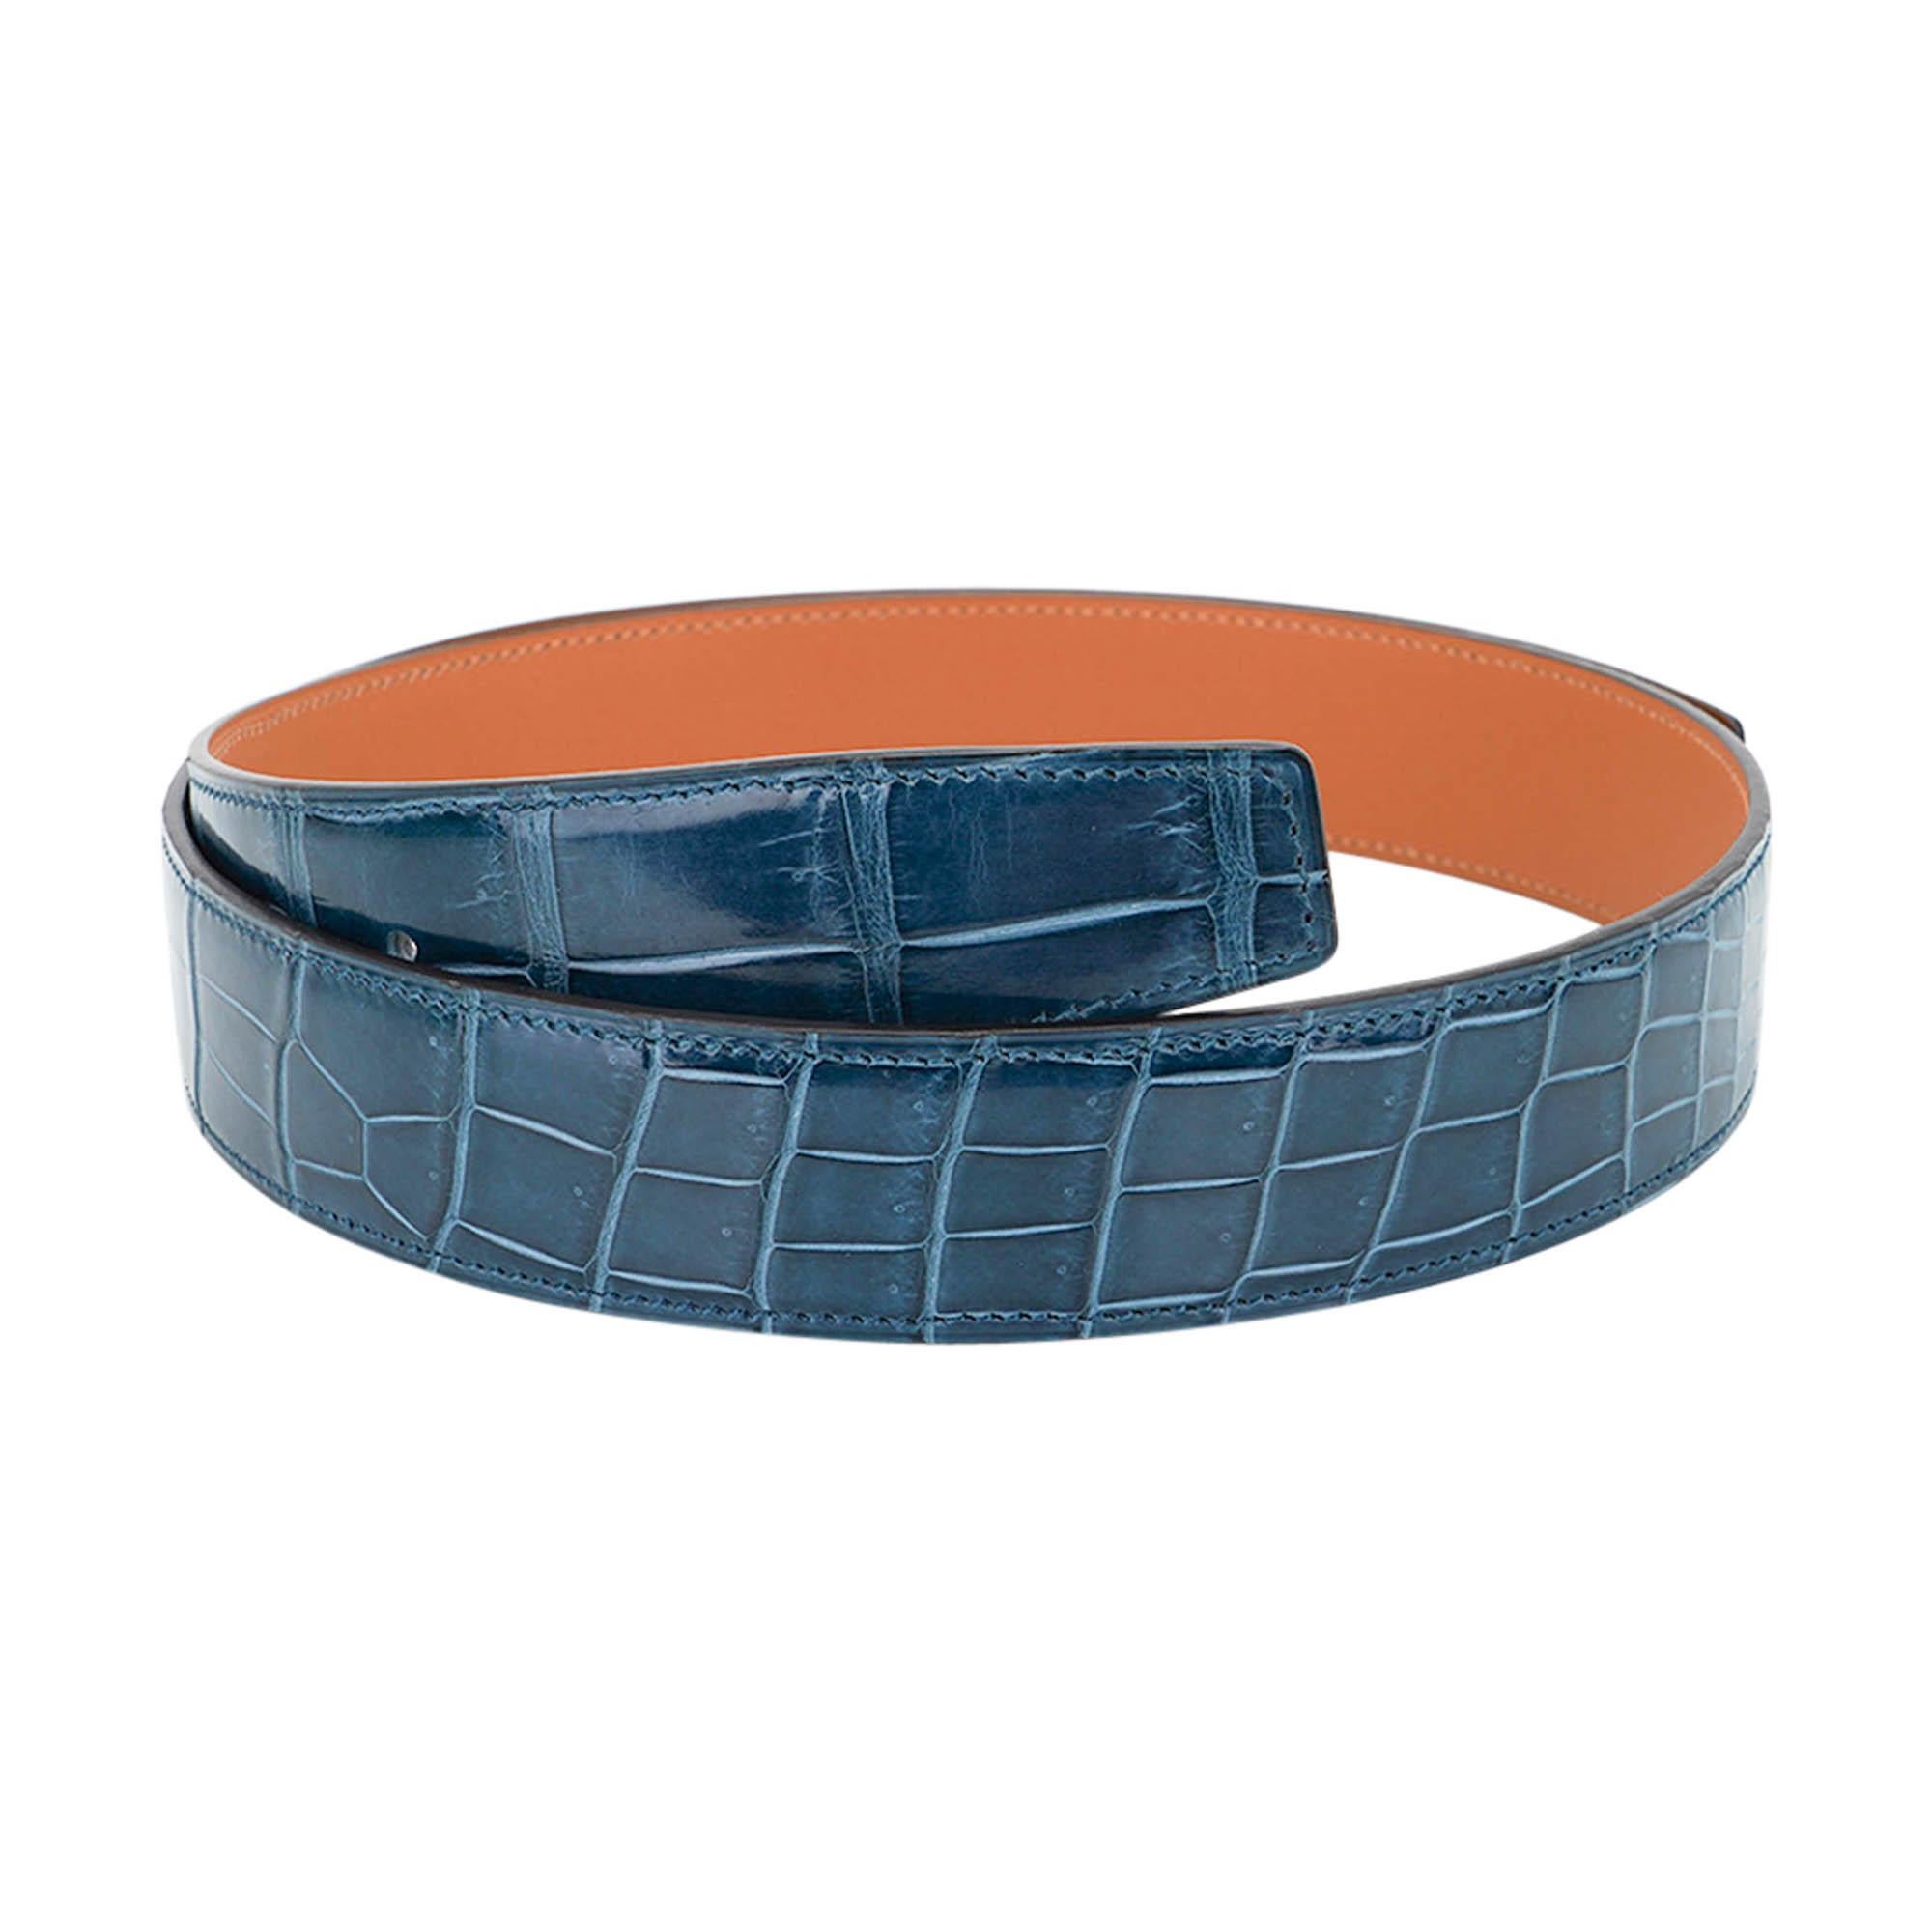 Mightychic offers an Hermes Constance 32 mm belt strap ONLY featured in Bleu Colvert
Porosus Crocodile.
This gorgeous neutral muted blue creates a very chic and wearable belt.
Pairs beautifully with either a Palladium or Gold 32 mm buckle.
Signature